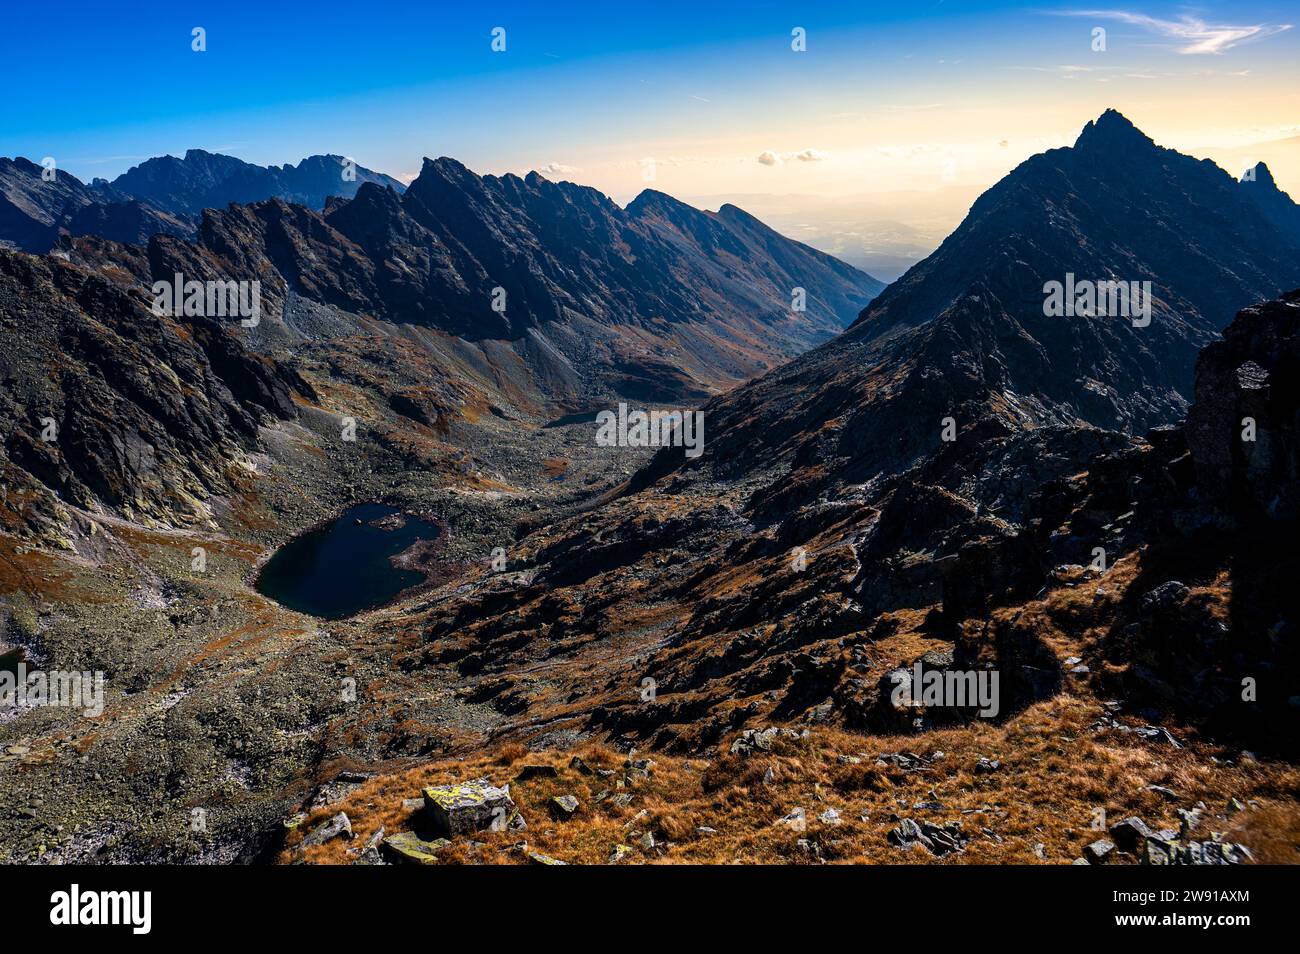 The Mlynicka Valley. Autumn landscape of the High Tatras. One of the most popular travel destination in Poland and Slovakia. Sunny October day in the Stock Photo